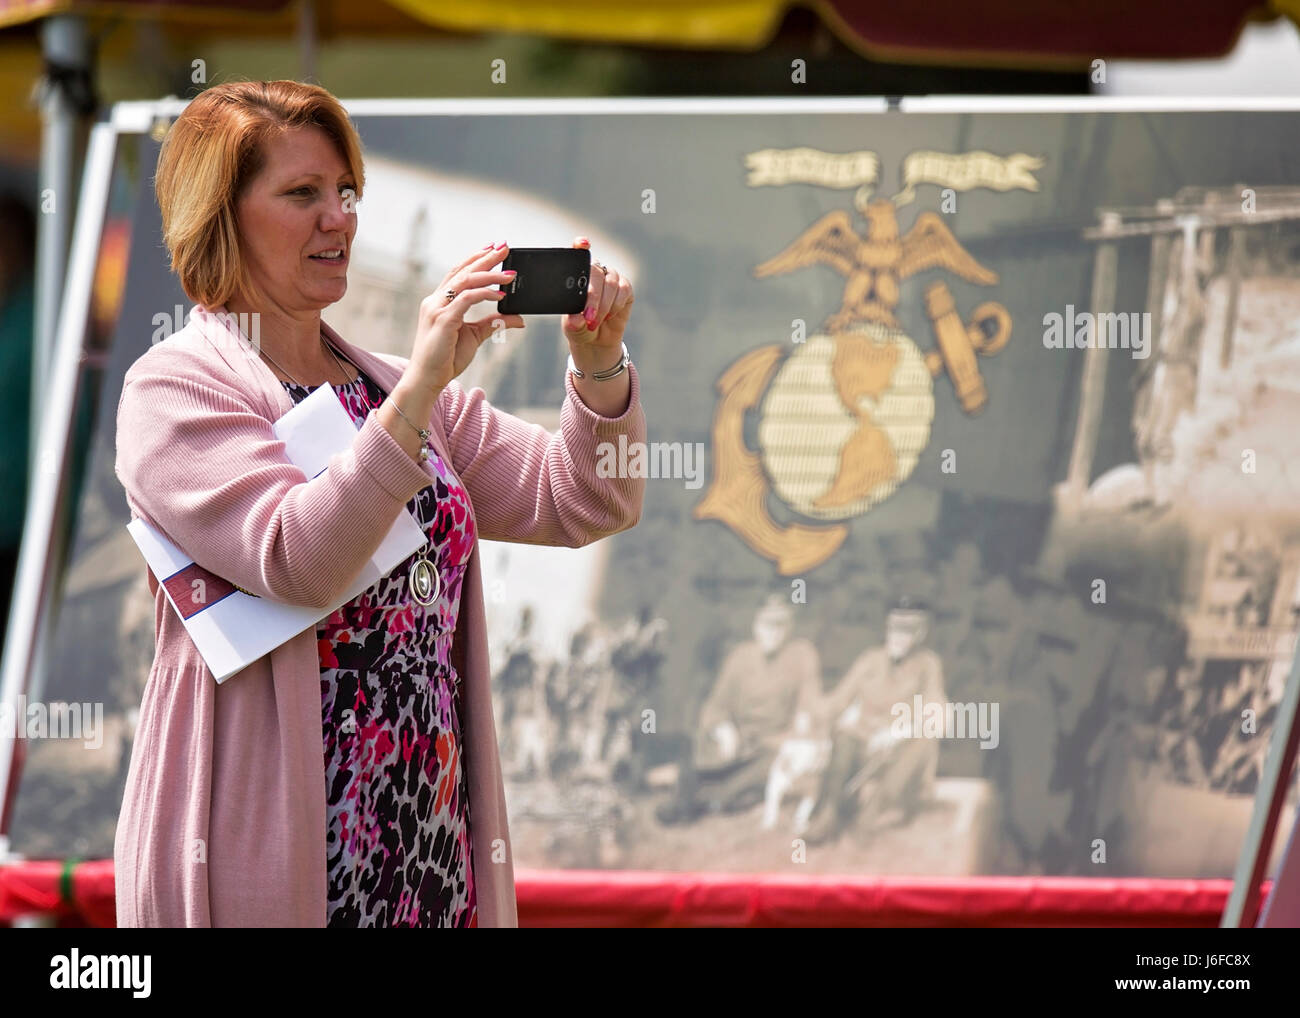 An attendee takes a picture of the display at the Centennial Celebration Ceremony at Lejeune Field, Marine Corps Base (MCB) Quantico, Va., May 10, 2017. The event commemorates the founding of MCB Quantico in 1917, and consisted of performances by the U.S. Marine Corps Silent Drill Platoon and the U.S. Marine Drum & Bugle Corps. (U.S. Marine Corps photo by James H. Frank) Stock Photo